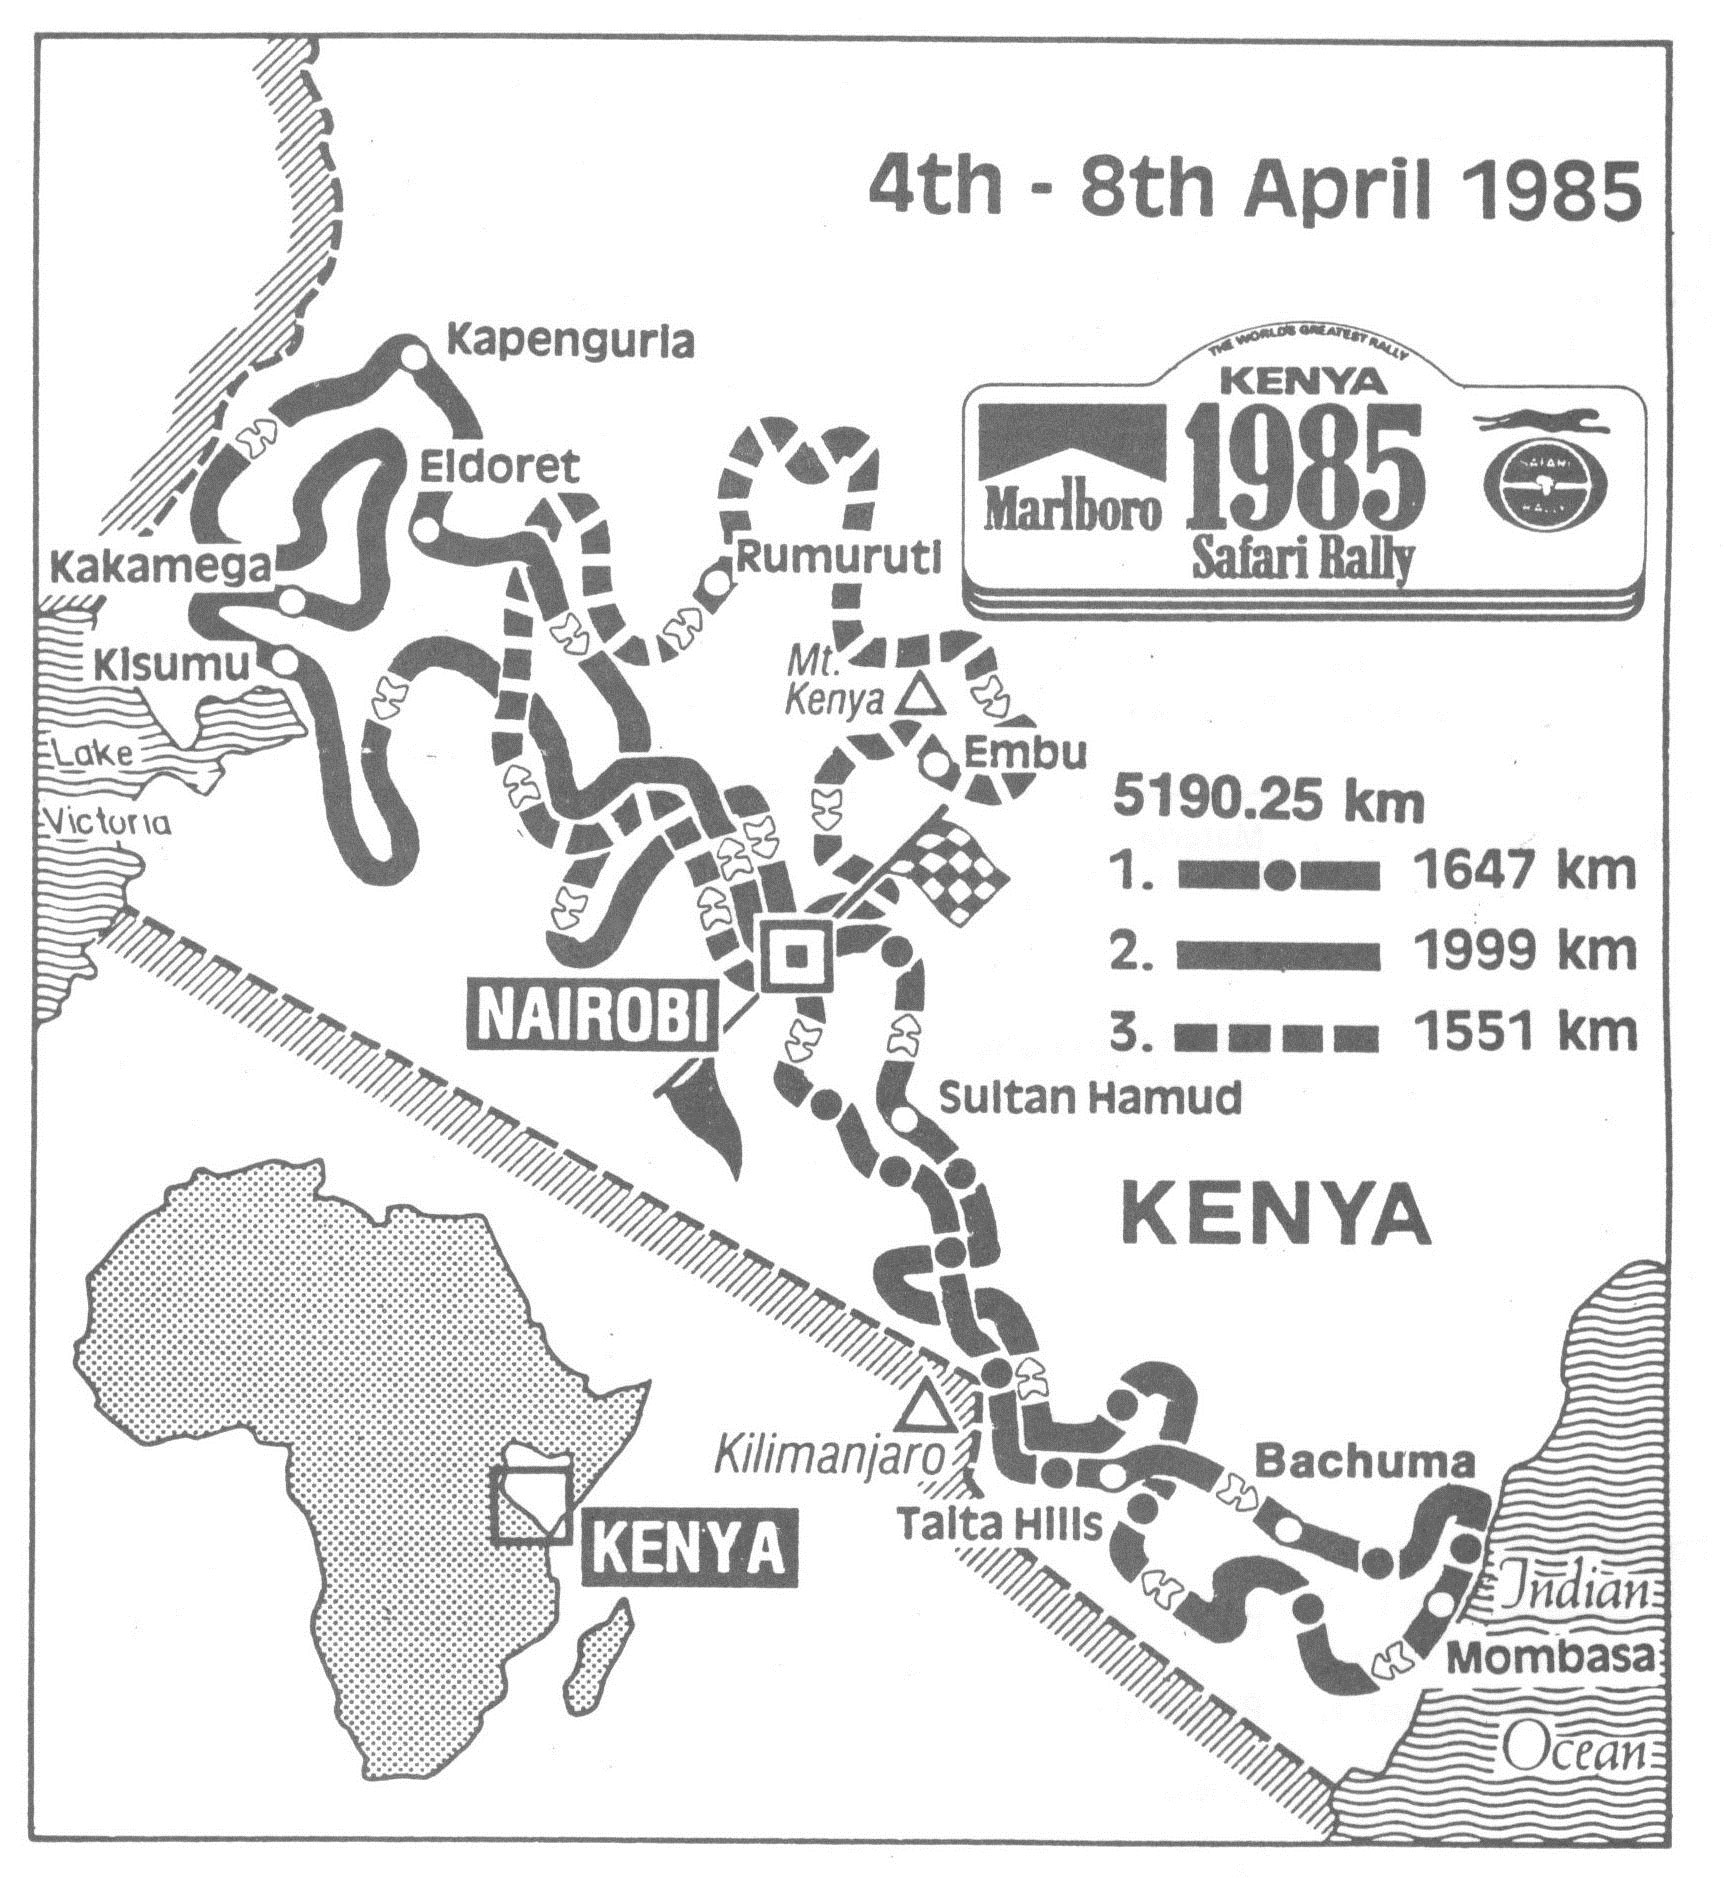 1985 COURSE MAP